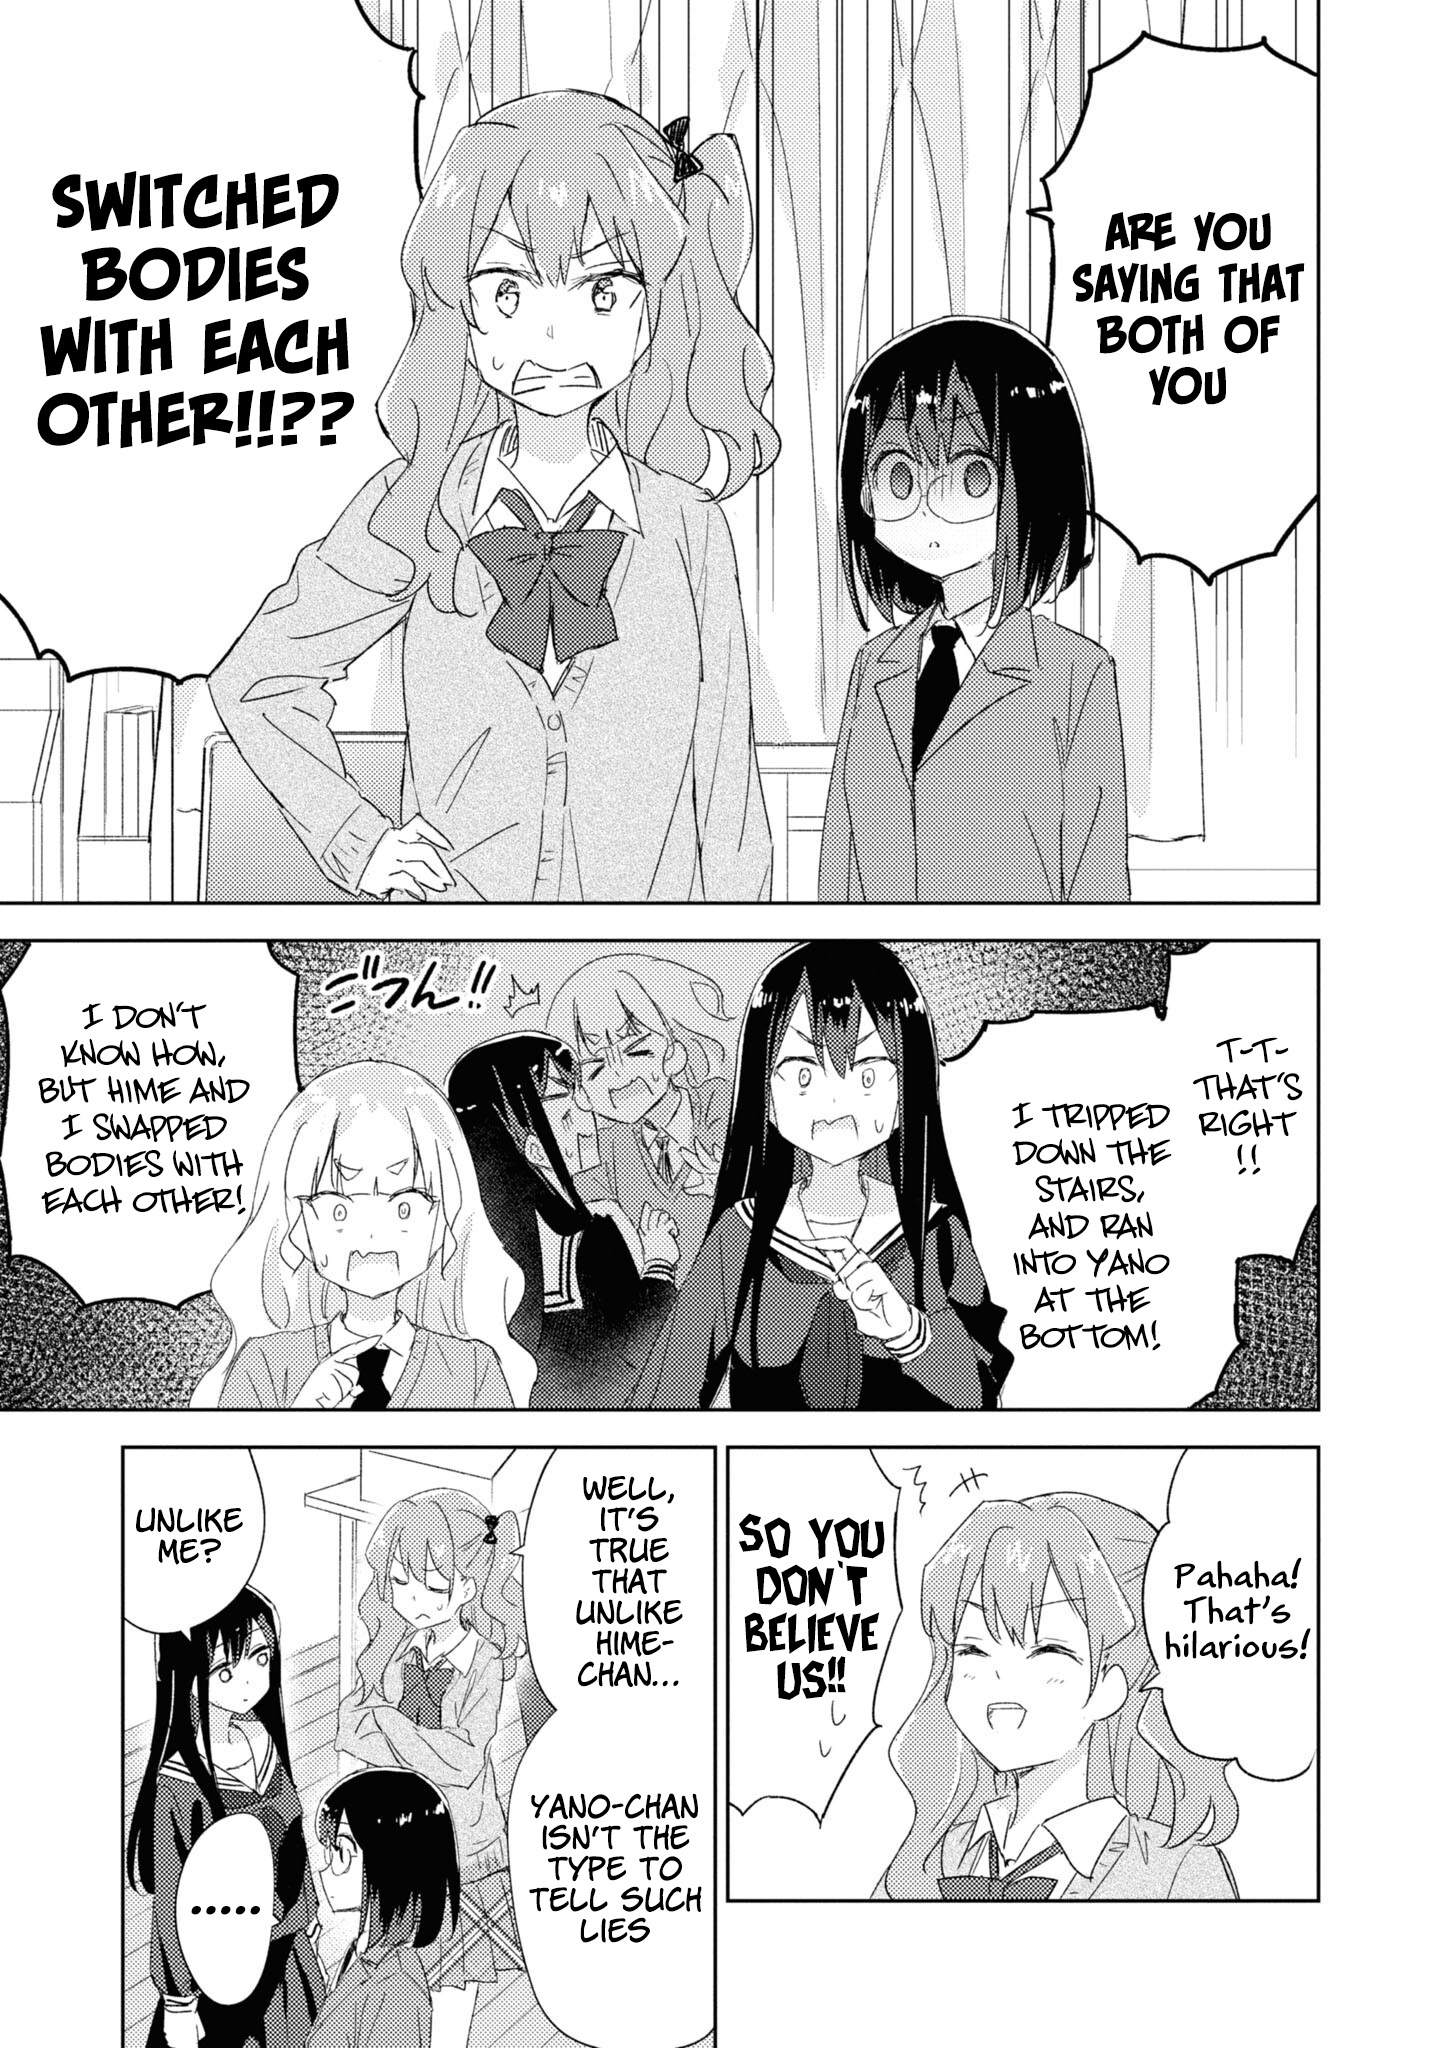 Yuri Is My Job! Official Comic Anthology Vol.1 Chapter 8: My Yuri Is Body Swap - Tsuke - Picture 3